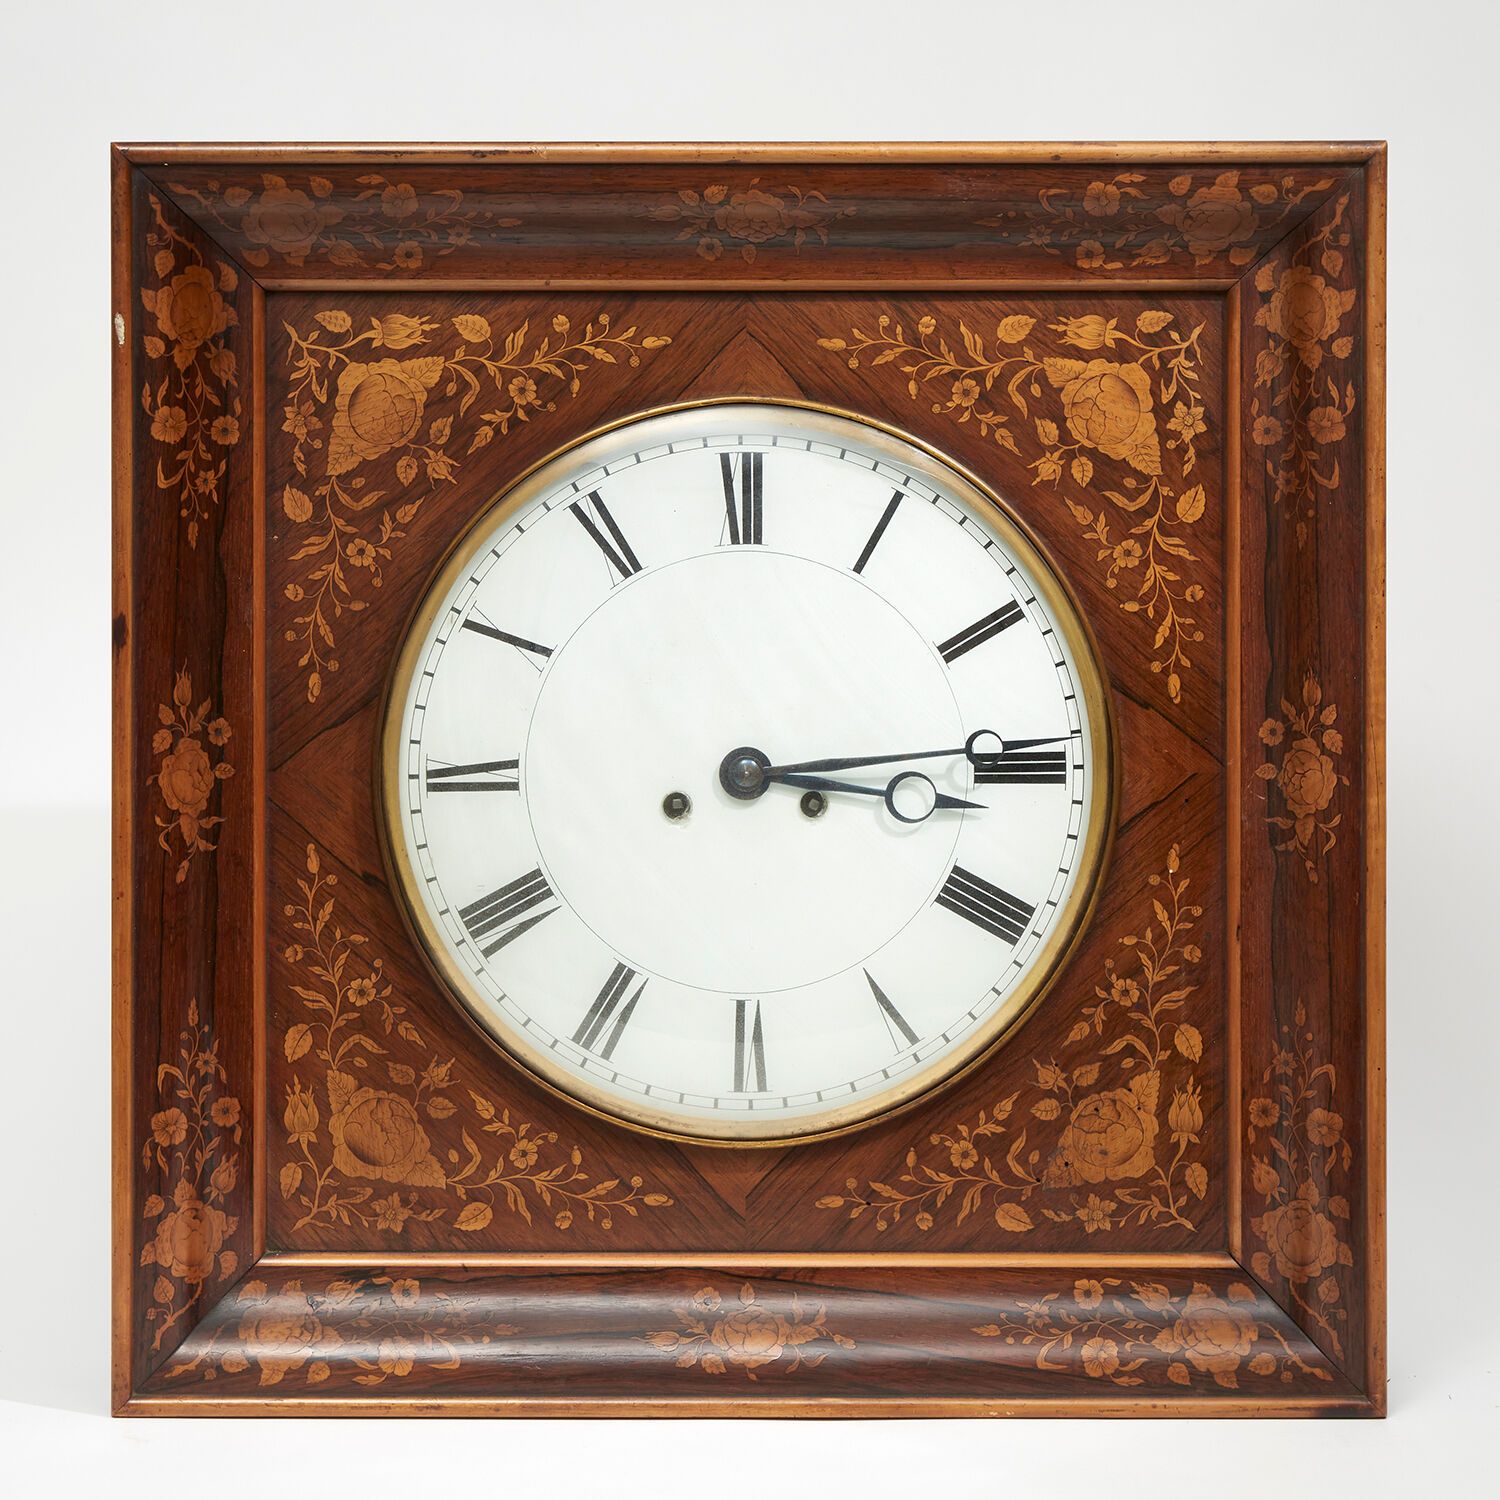 TRAVAIL FRANÇAIS FRENCH WORK
Square-shaped box wall clock, in rosewood and lemon&hellip;